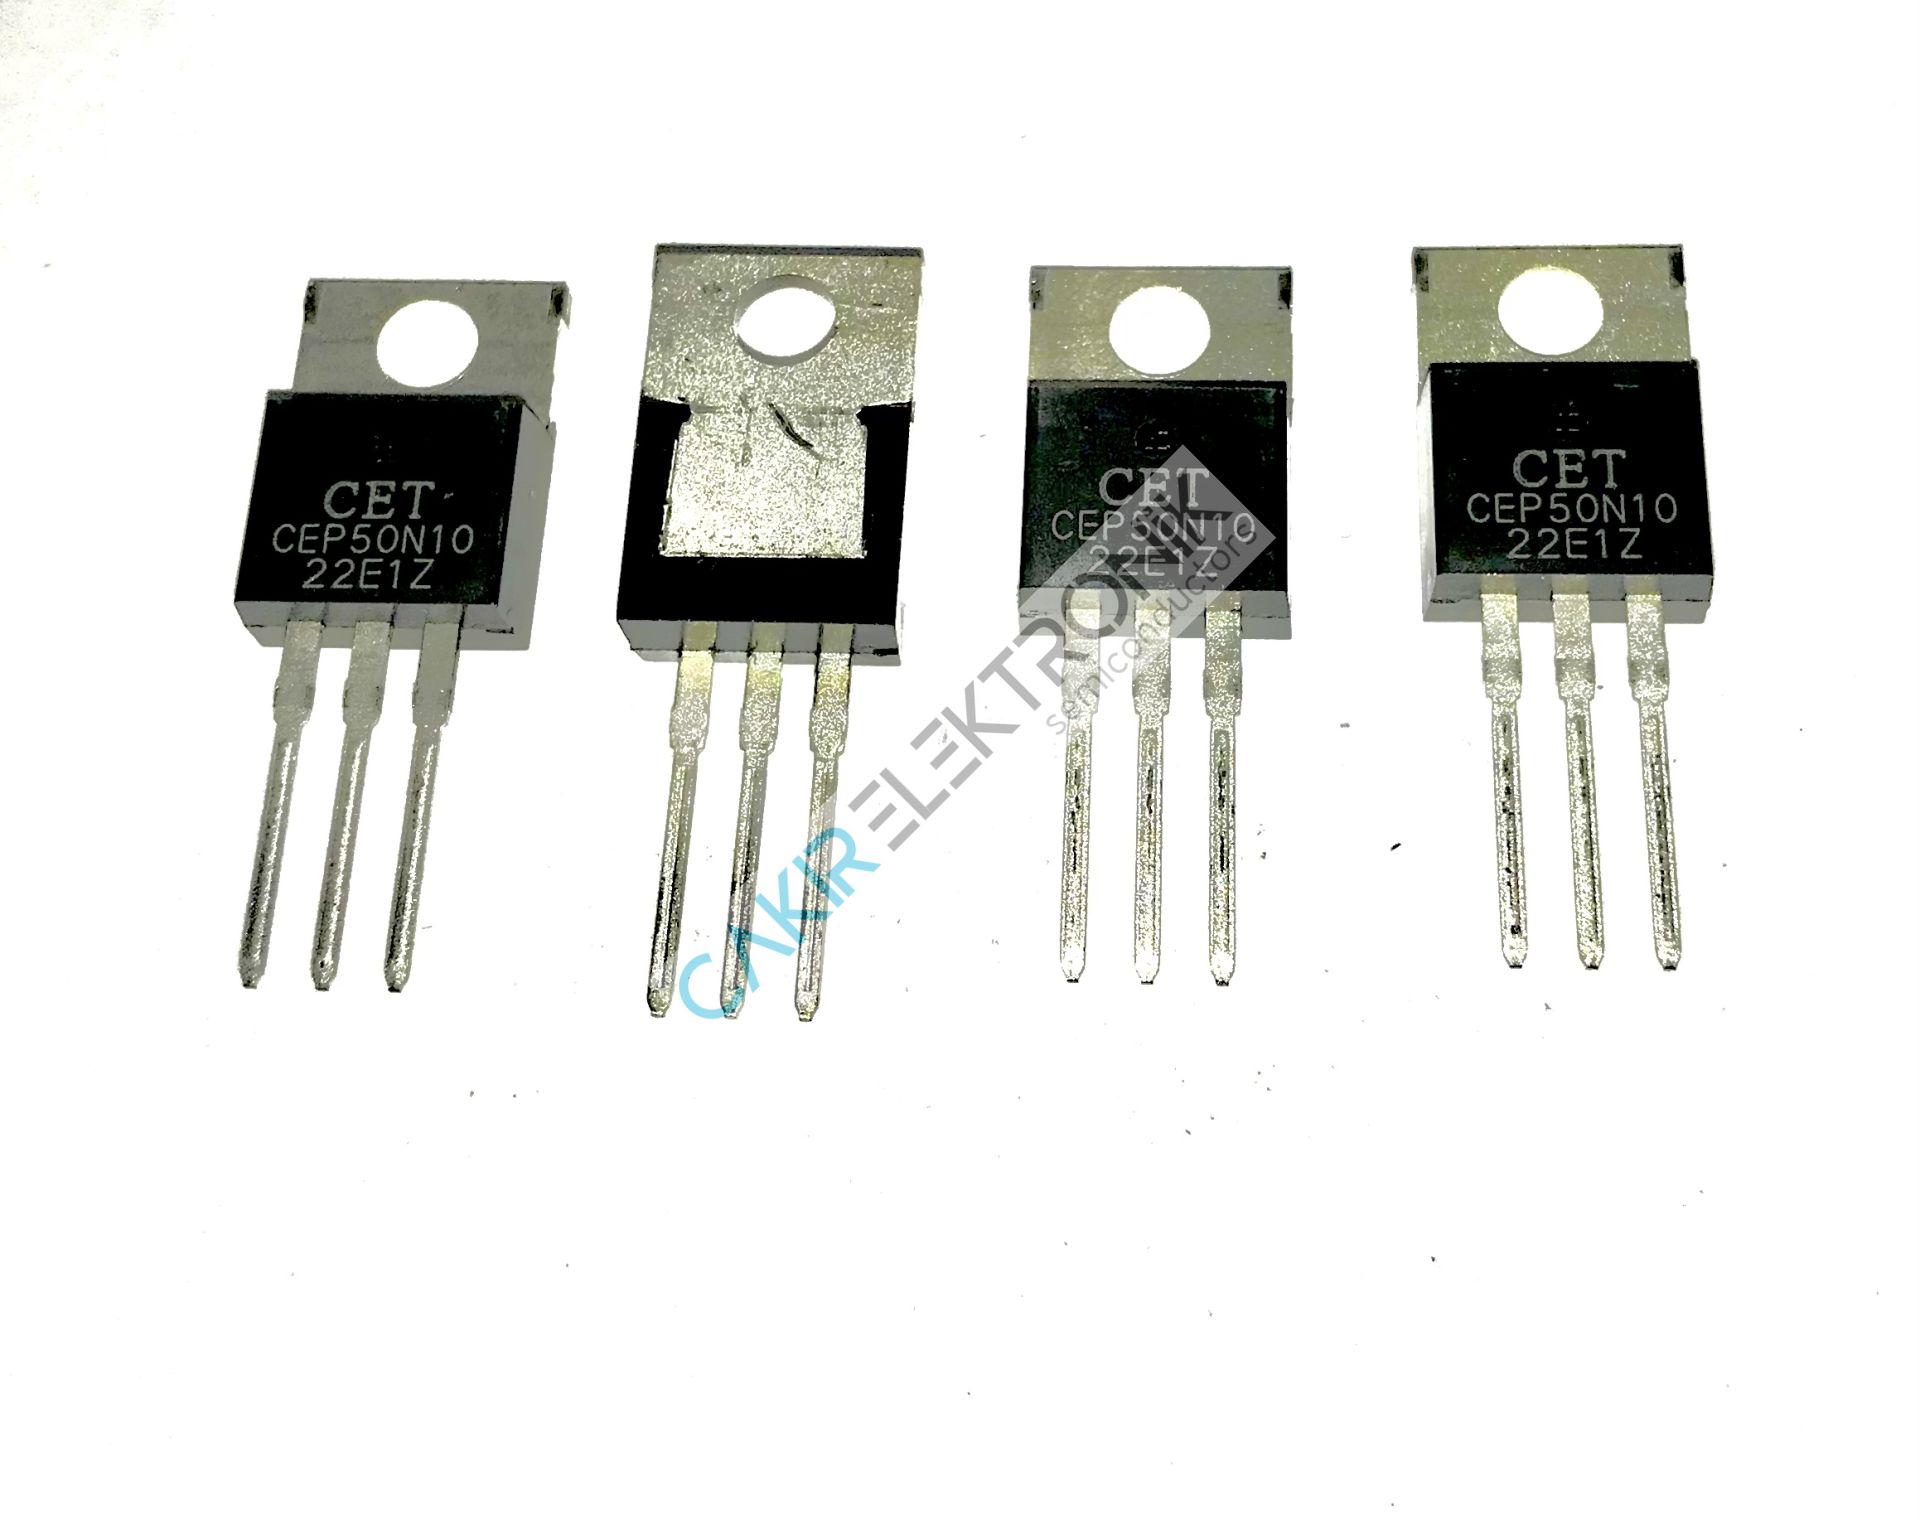 CEP50N10 ( FQP50N10 ) N-Channel Enhancement Mode Field Effect Transistor FEATURES 100V, 50A, RDS(ON) = 30mΩ @VGS = 10V.